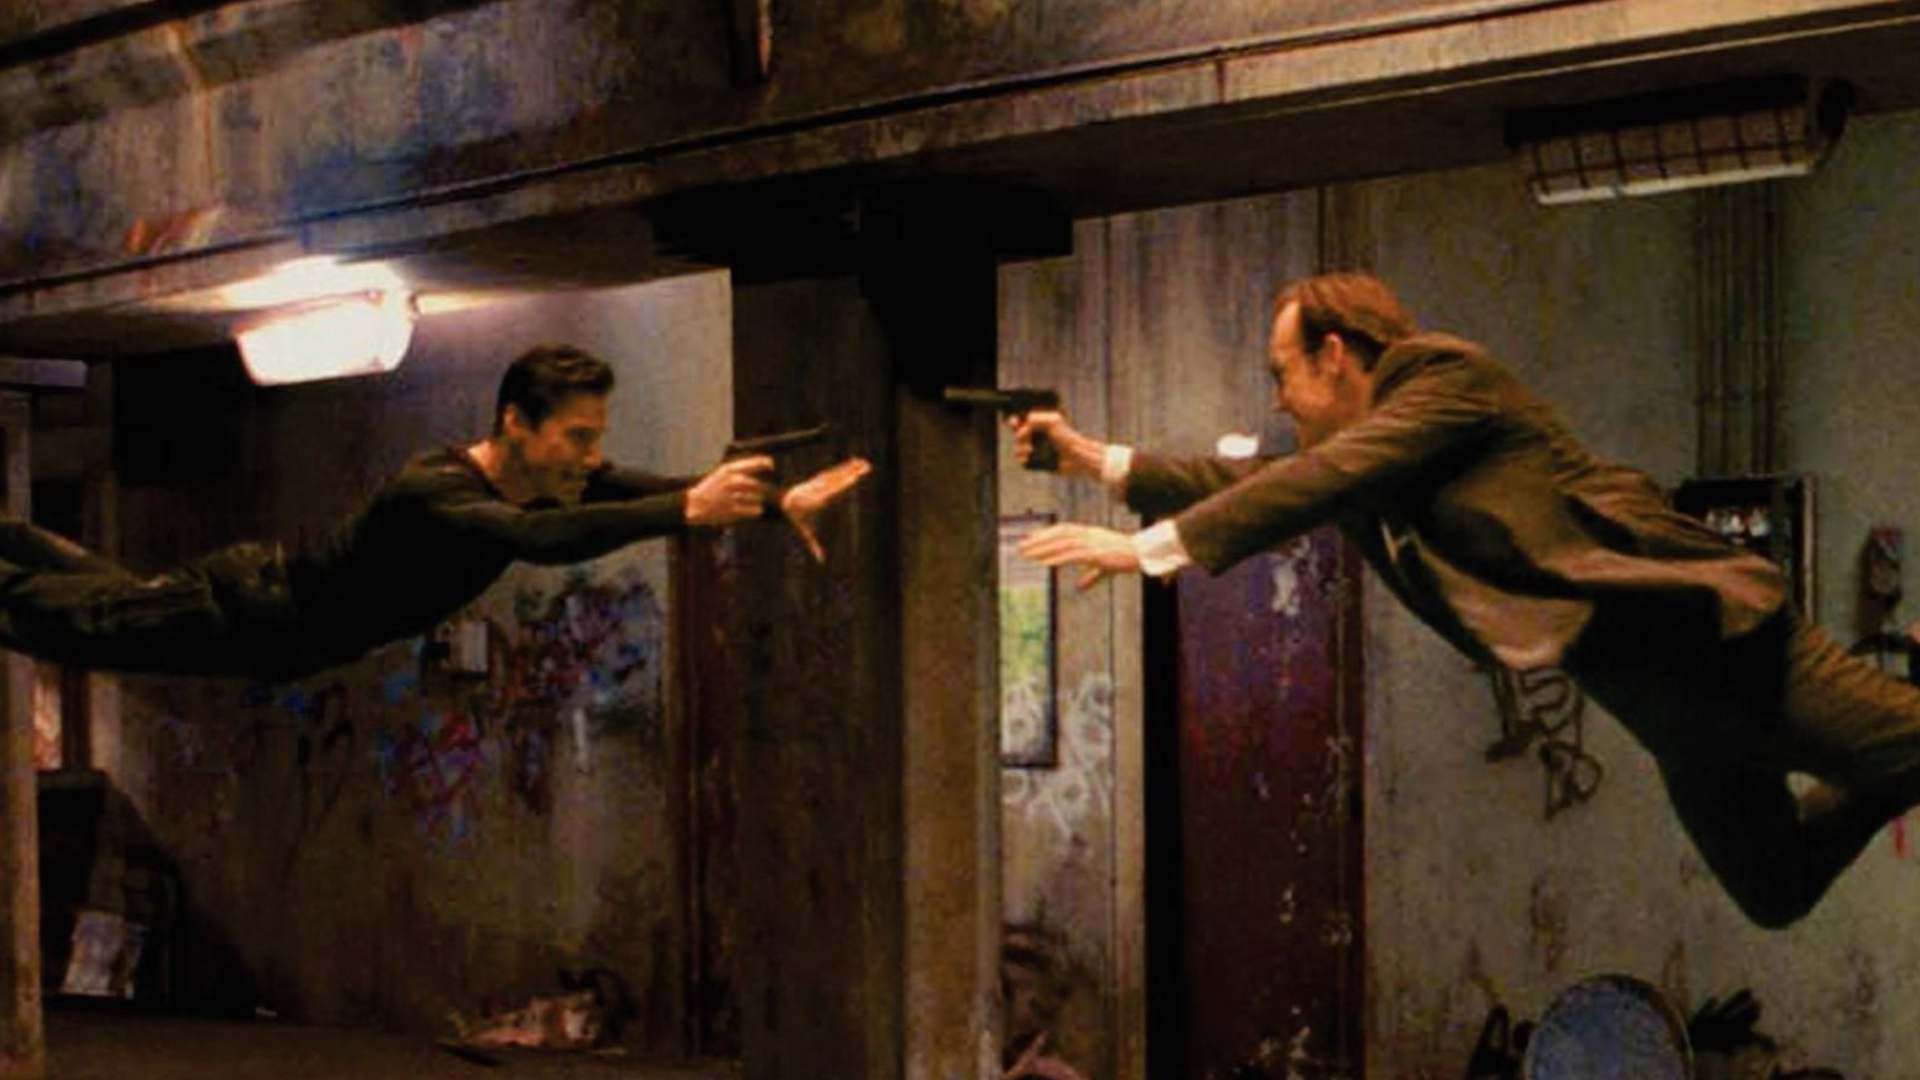 A still from The Matrix movie. Set in a dirty and graffitied underground train station, there are two men flying towards each other, each man pointing a gun at the other. The man on the left is Neo, dressed in black jeans and a black long-sleeved shirt. On the right is Agent Smith, dressed in a suit.